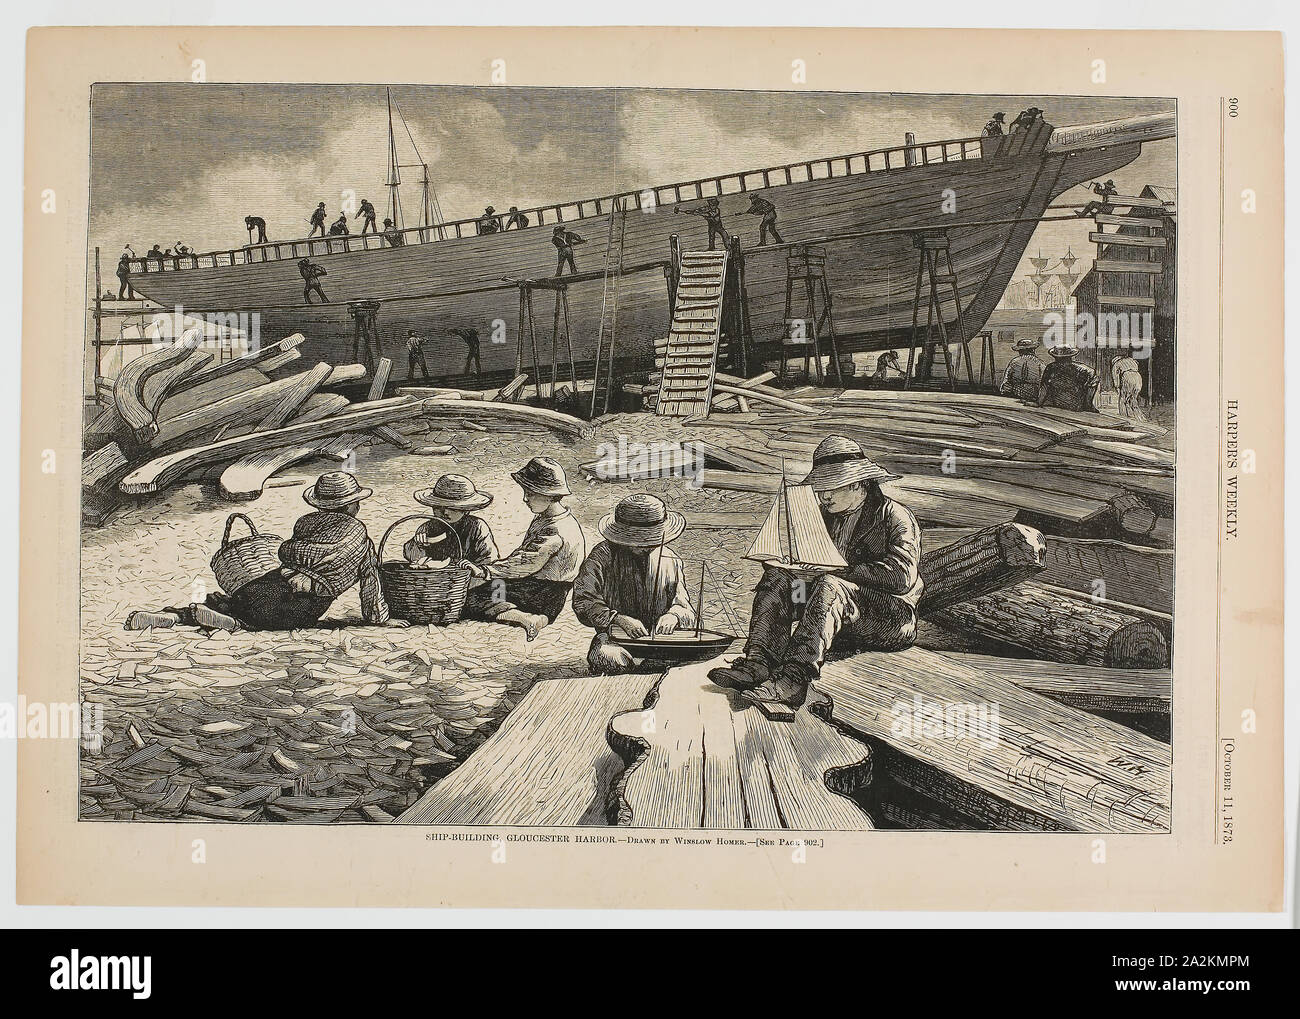 Ship Building, Gloucester Harbor, published October 11, 1873, Winslow Homer (American, 1836-1910), published by Harper’s Weekly (American, 1857-1916), United States, Wood engraving on paper, 235 x 347 mm (image), 280 x 401 mm (sheet Stock Photo